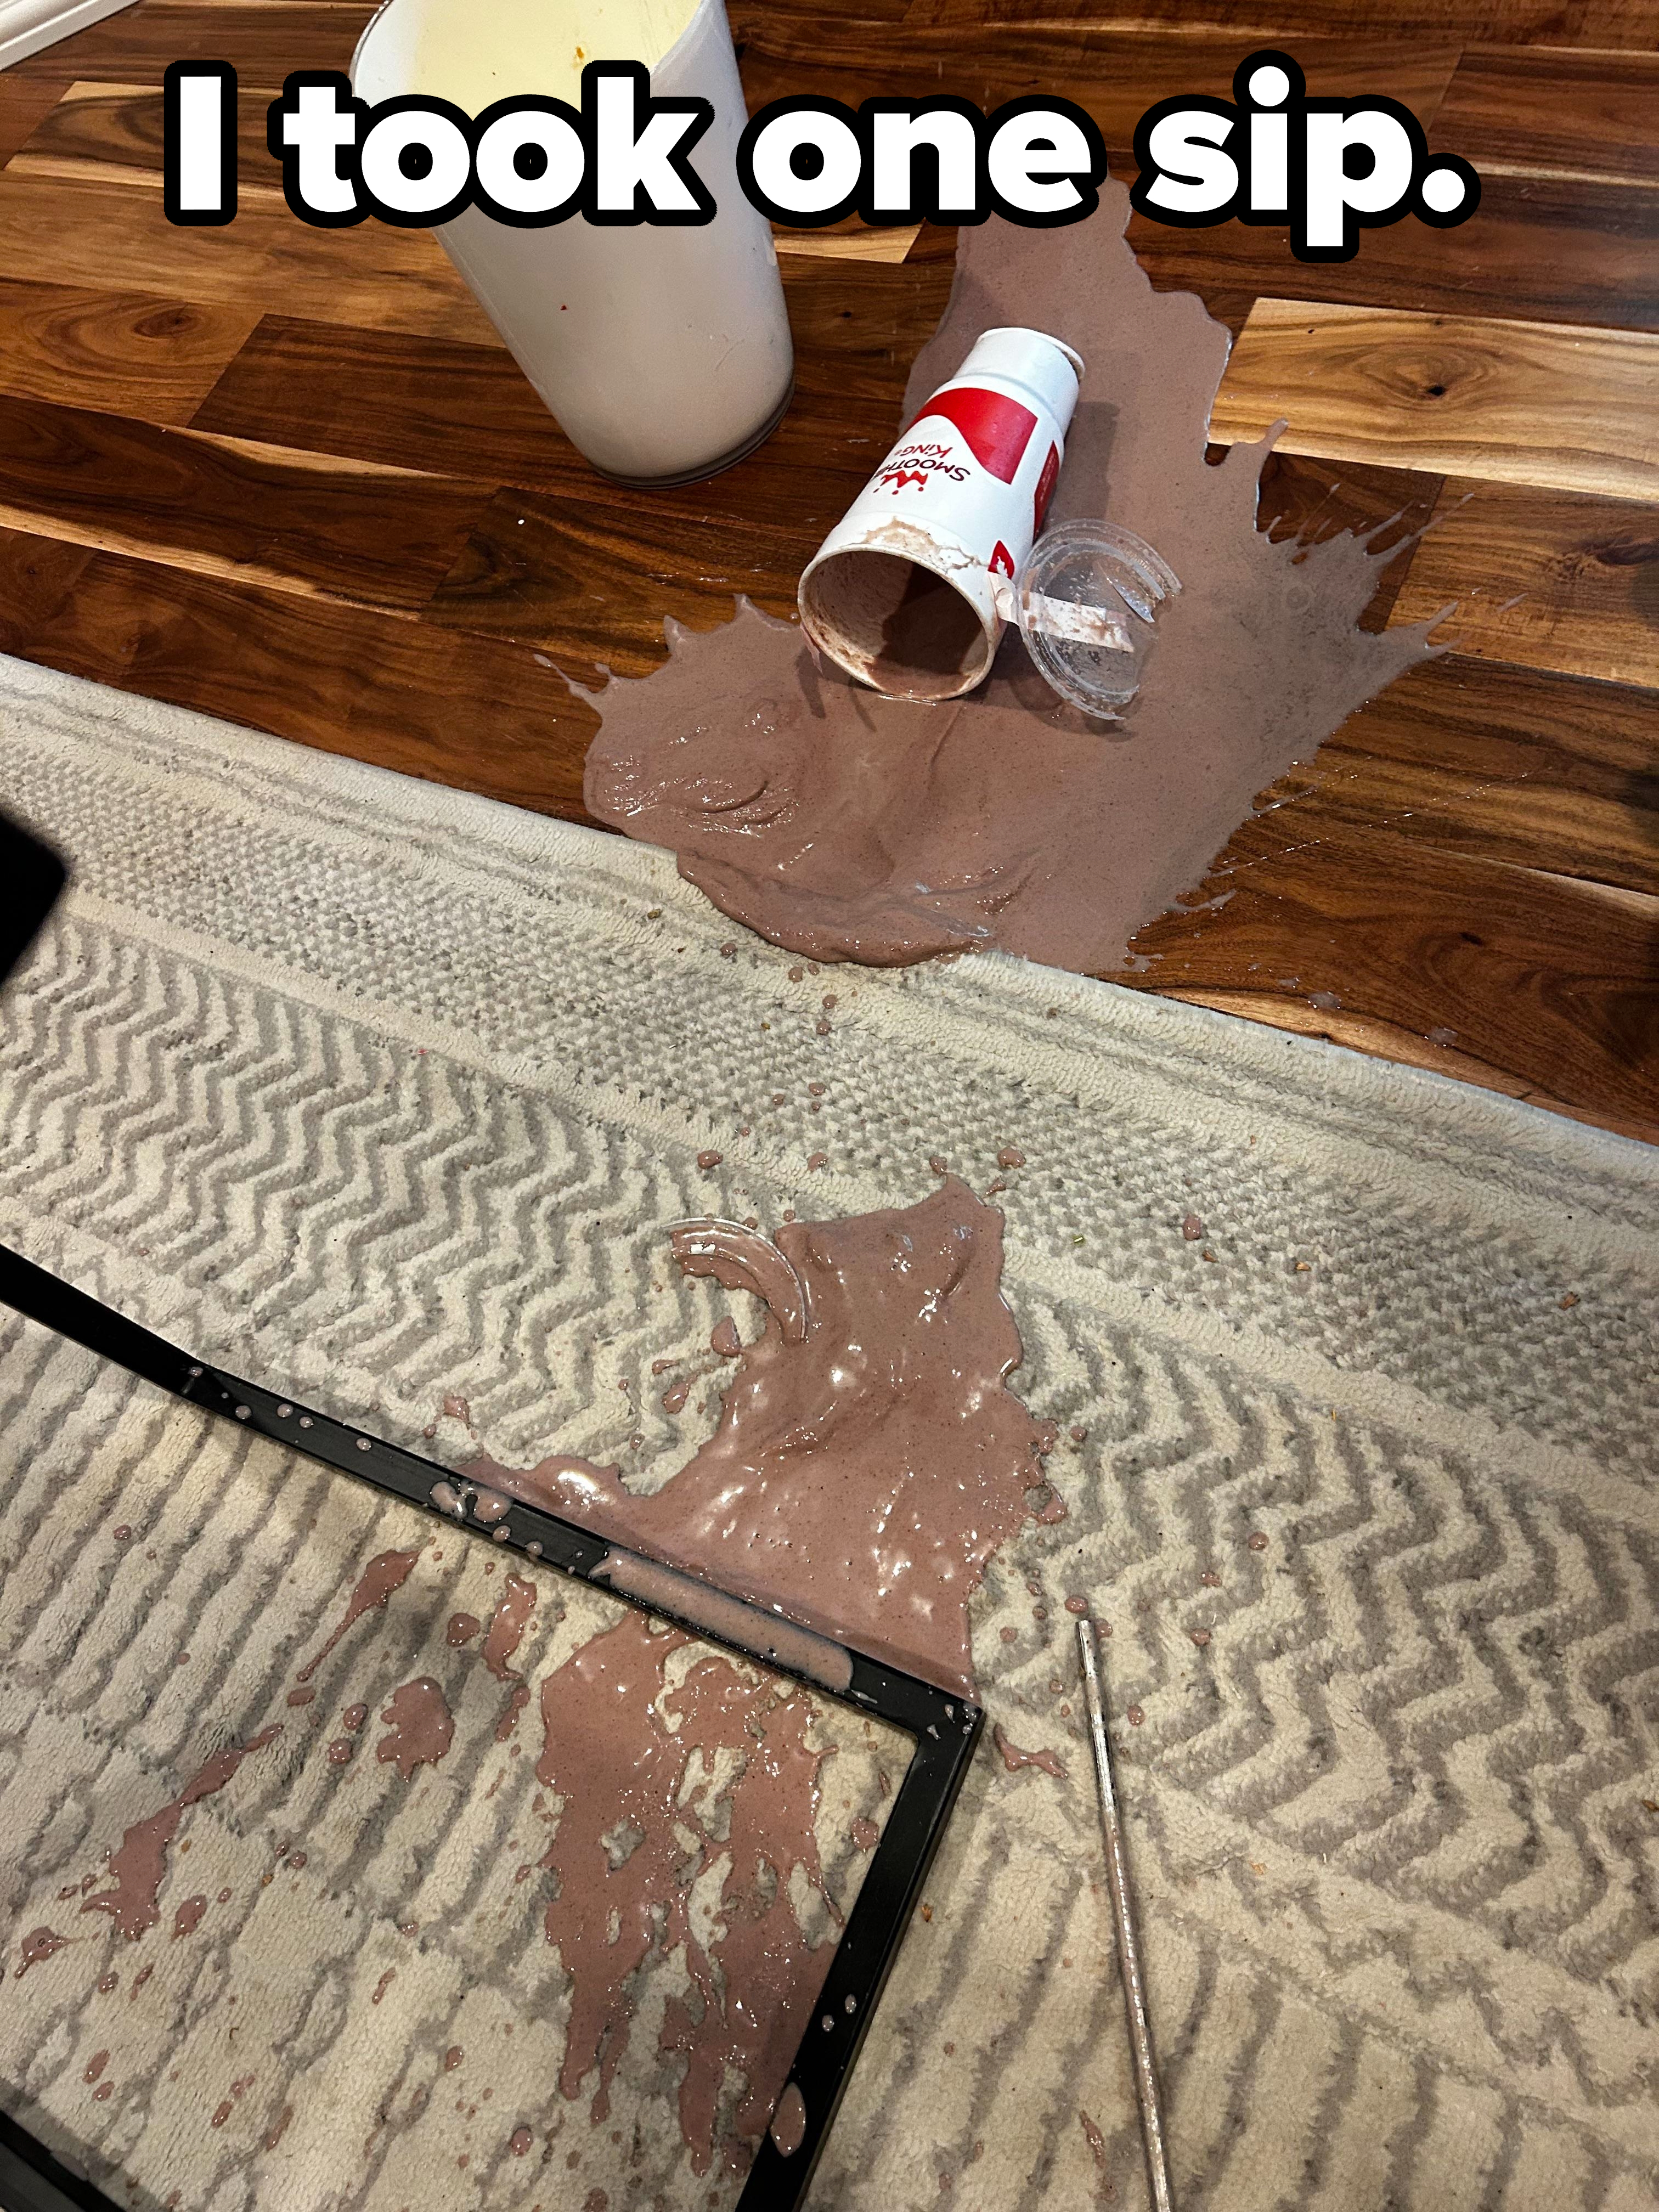 A large chocolate smoothie falls all over a rug with the caption &quot;I took one sip&quot;